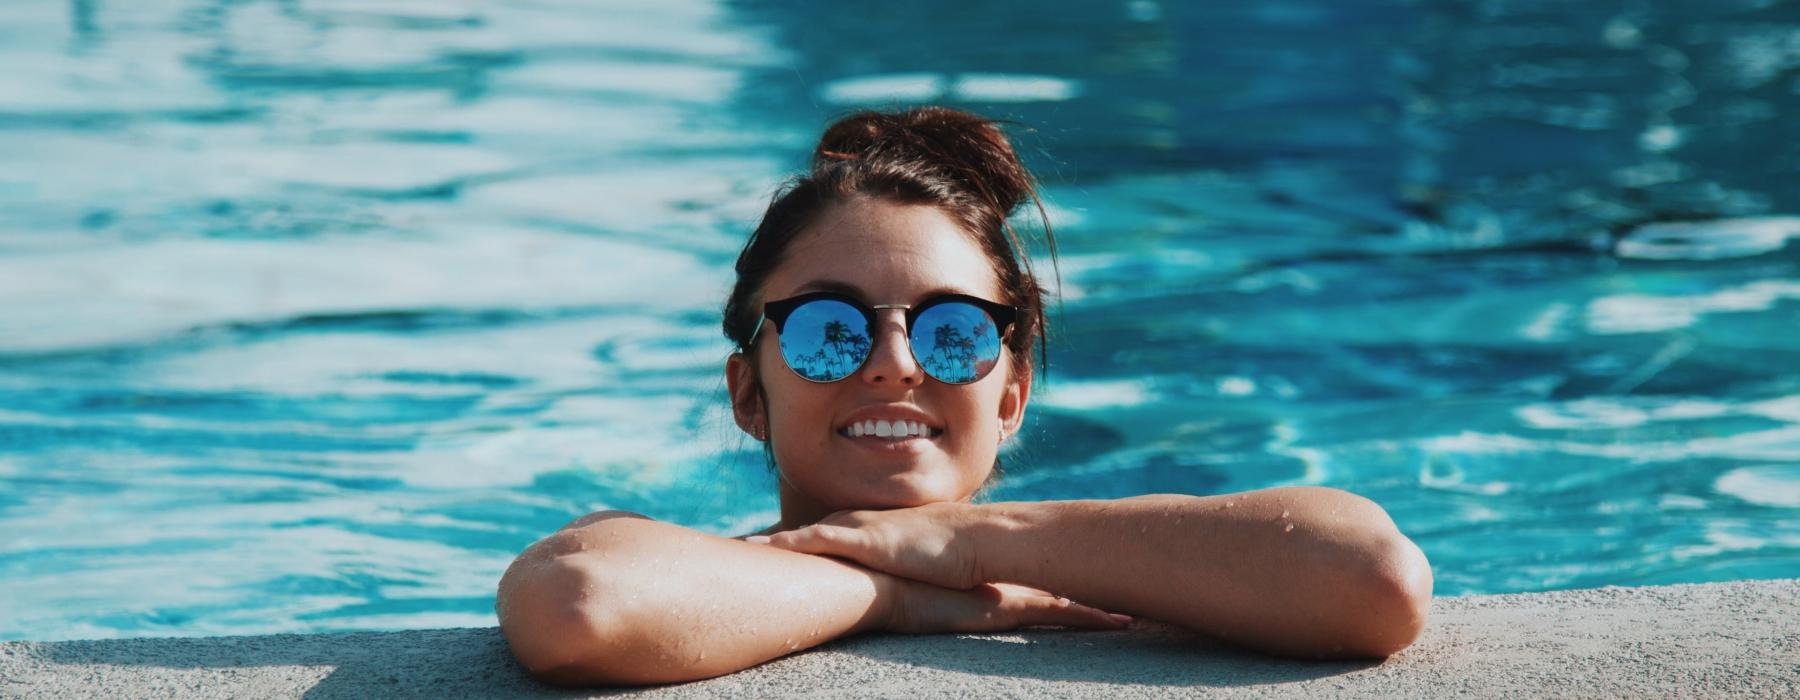 woman wearing sunglasses in a swimming pool